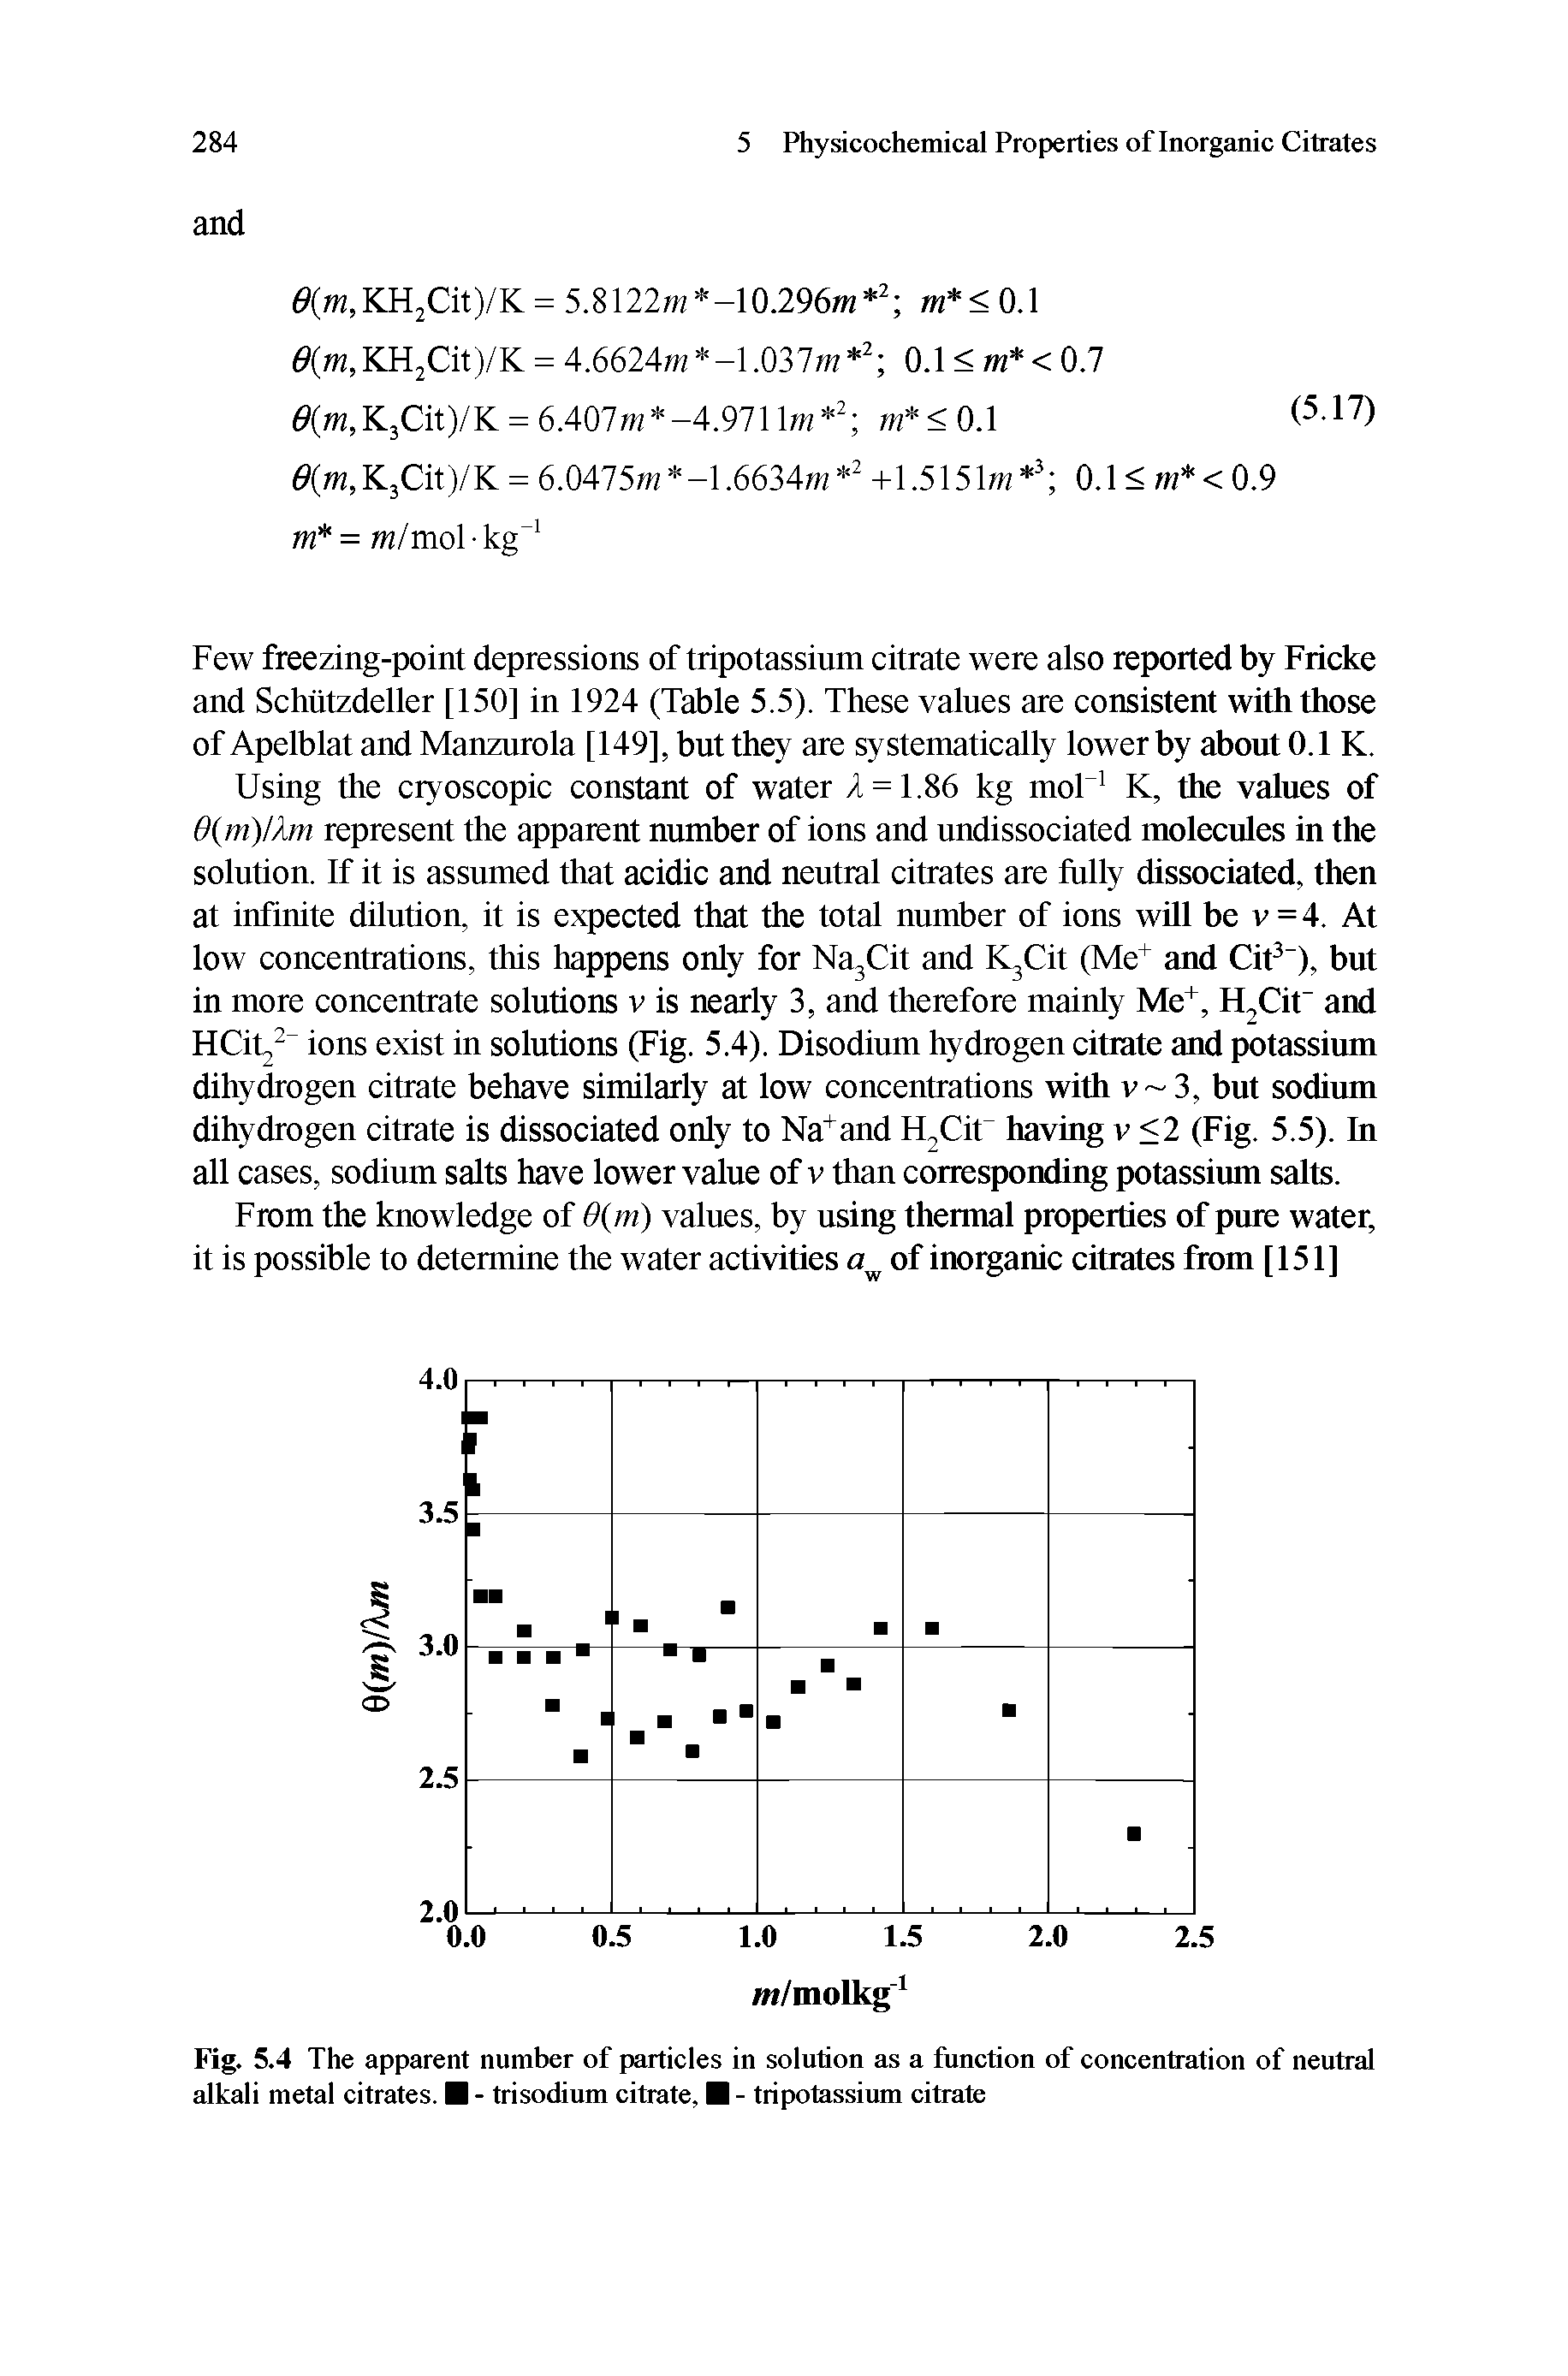 Fig. 5.4 The apparent number of particles in solution as a function of concentration of neutral alkali metal citrates. - trisodium citrate, - tripotassium citrate...